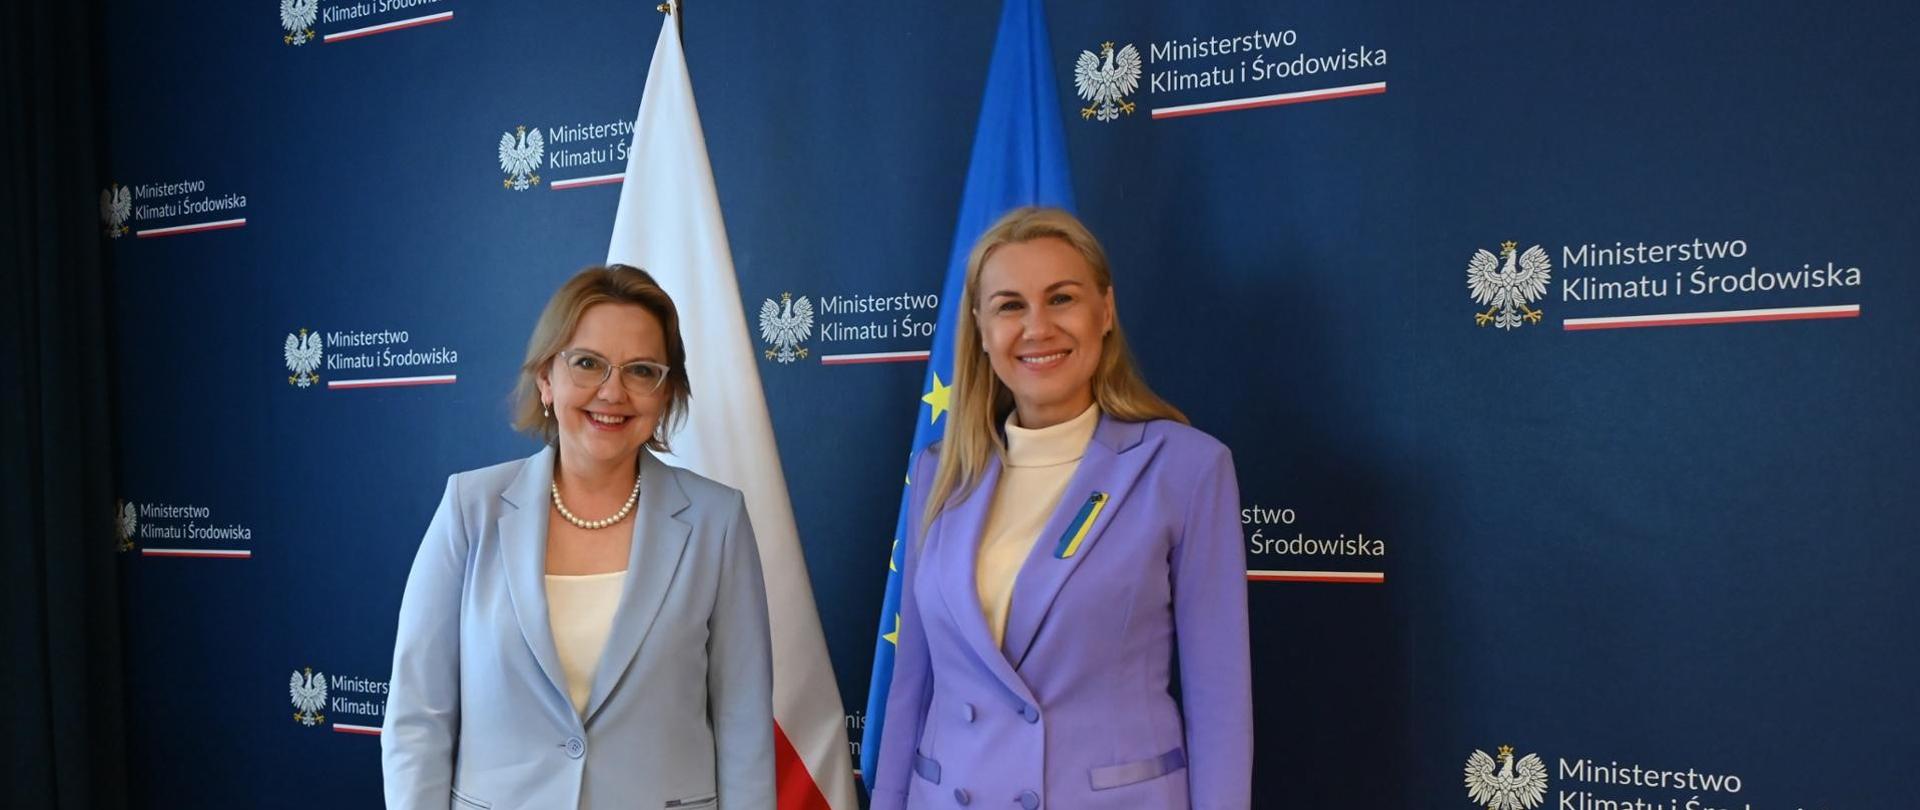 Minister Anna Moskwa met with the EU Commissioner for Energy